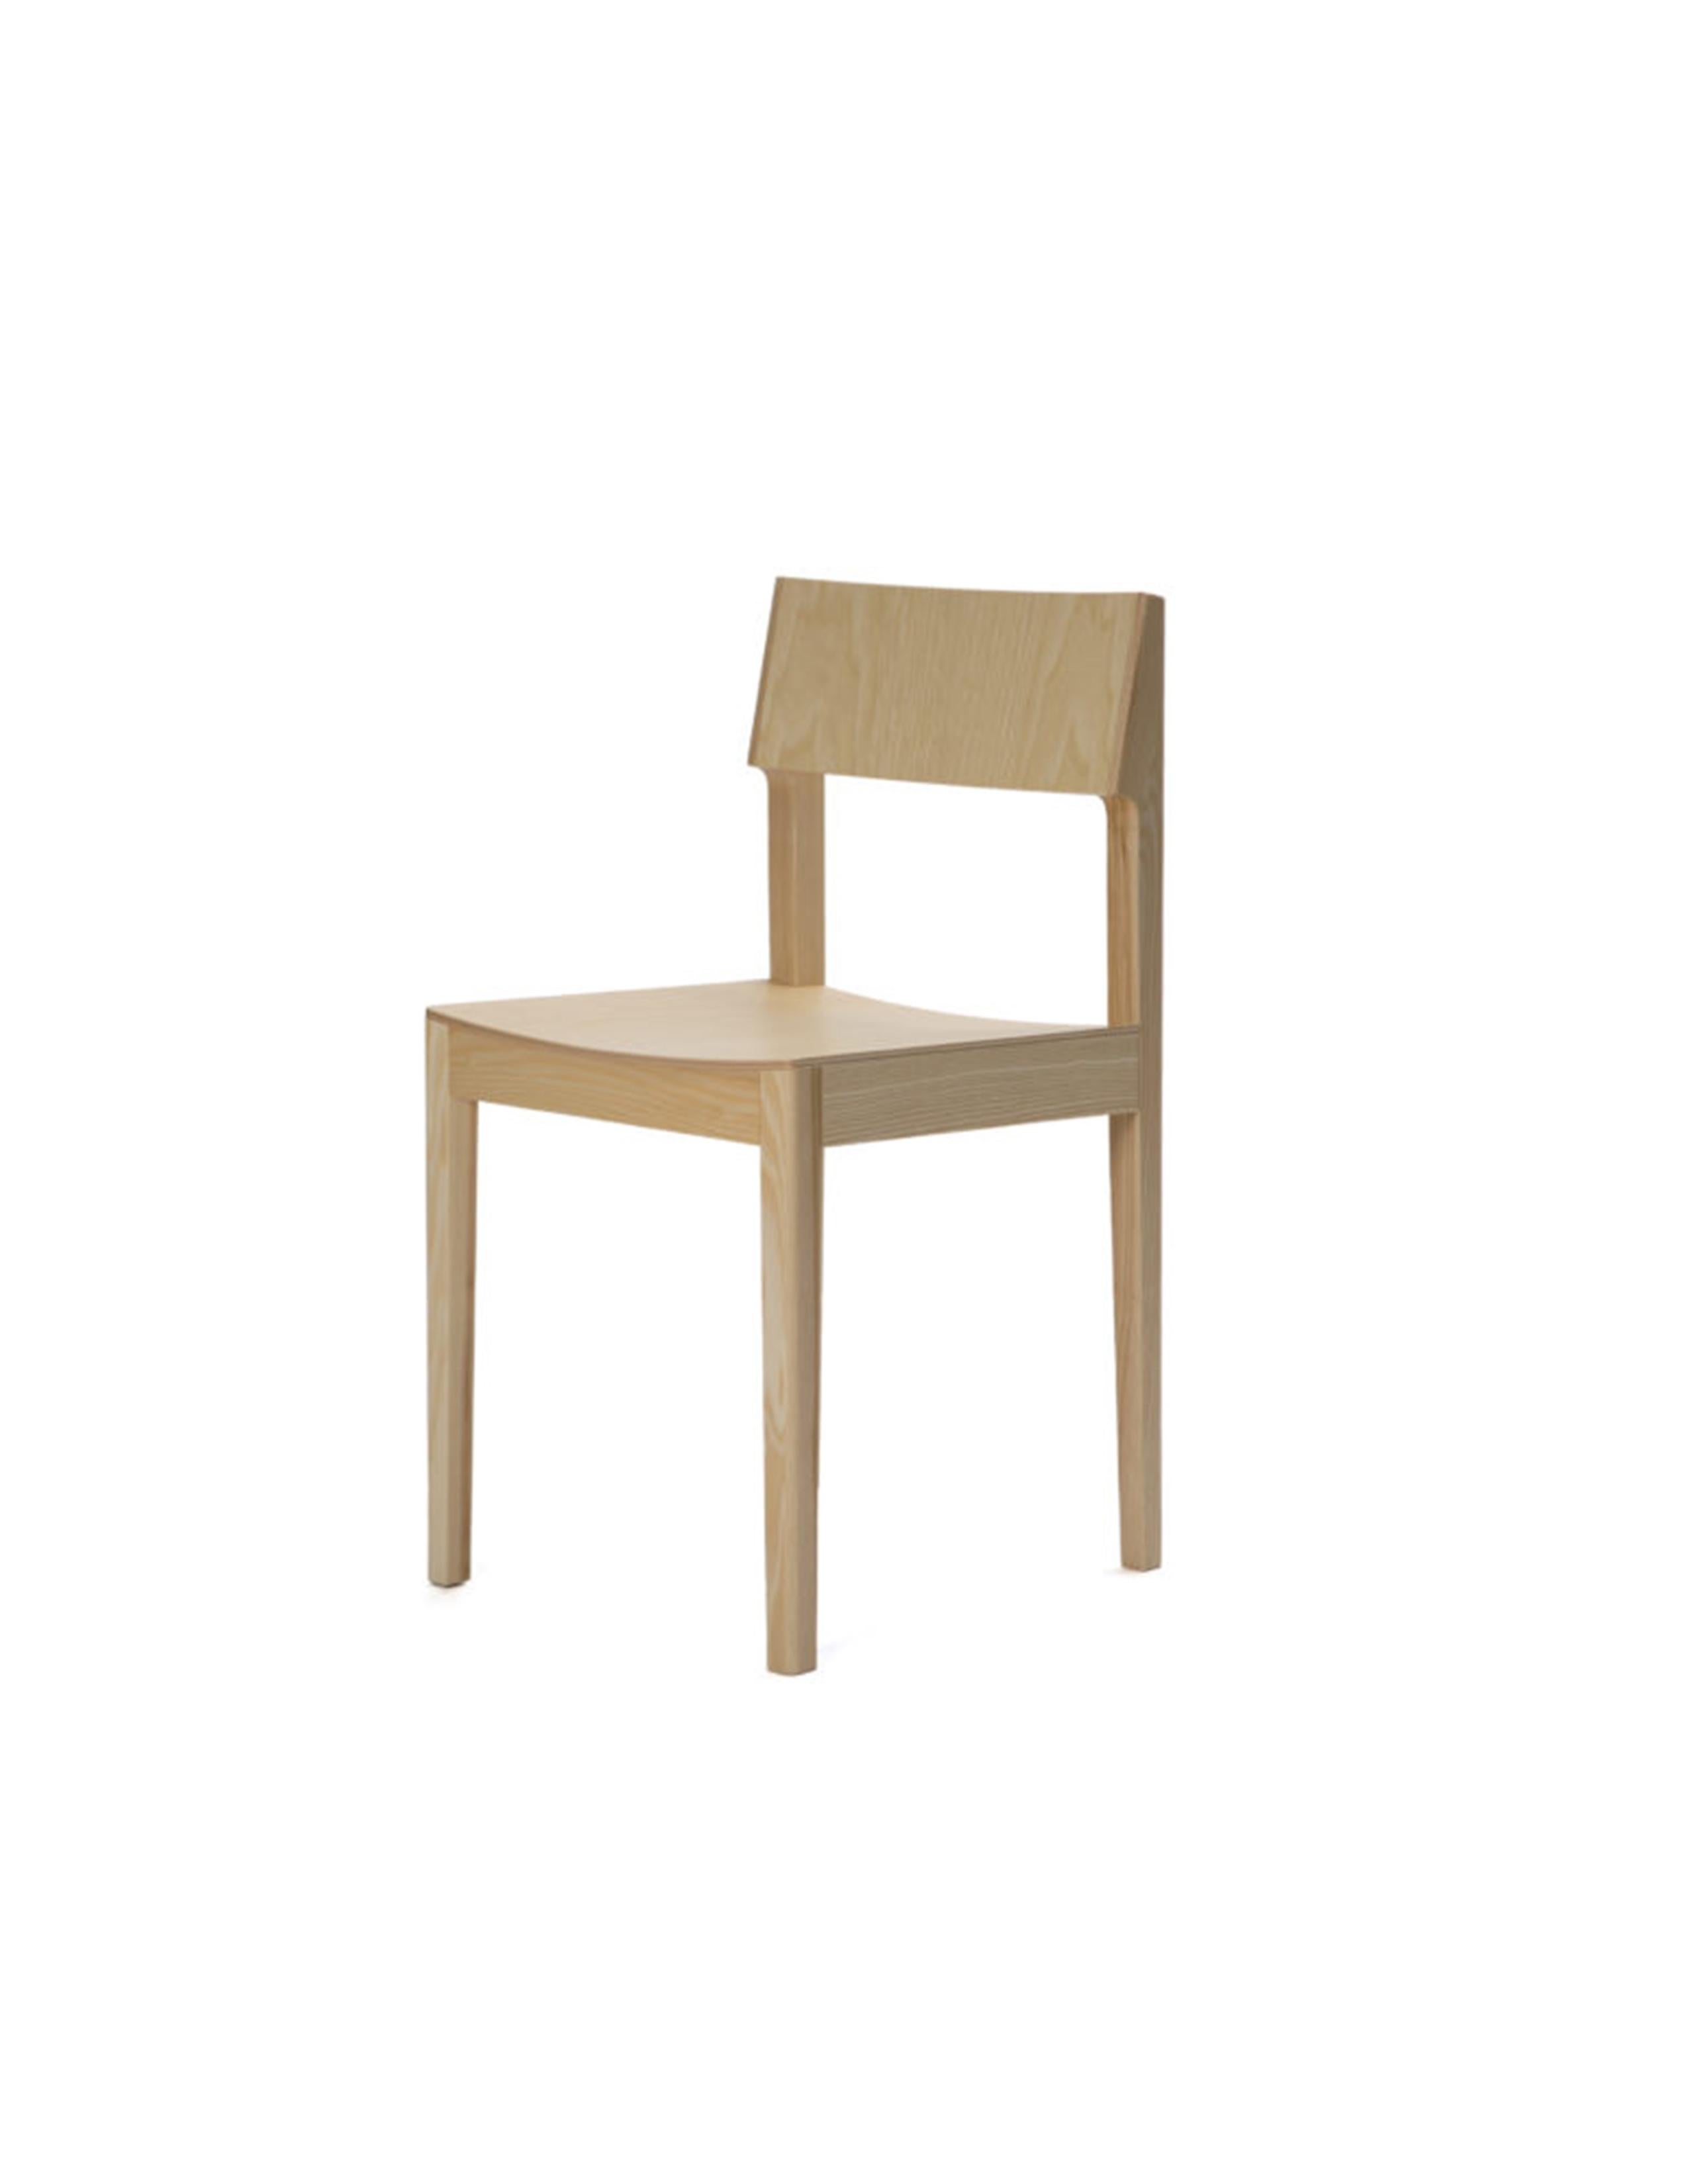 Intro A1 is a versatile and lightweight wooden chair equally suited for restaurants, hotels or domestic dining settings. It is compact and stackable with excellent ergonomics. With a simple and direct form, Intro chairs design roots back into the